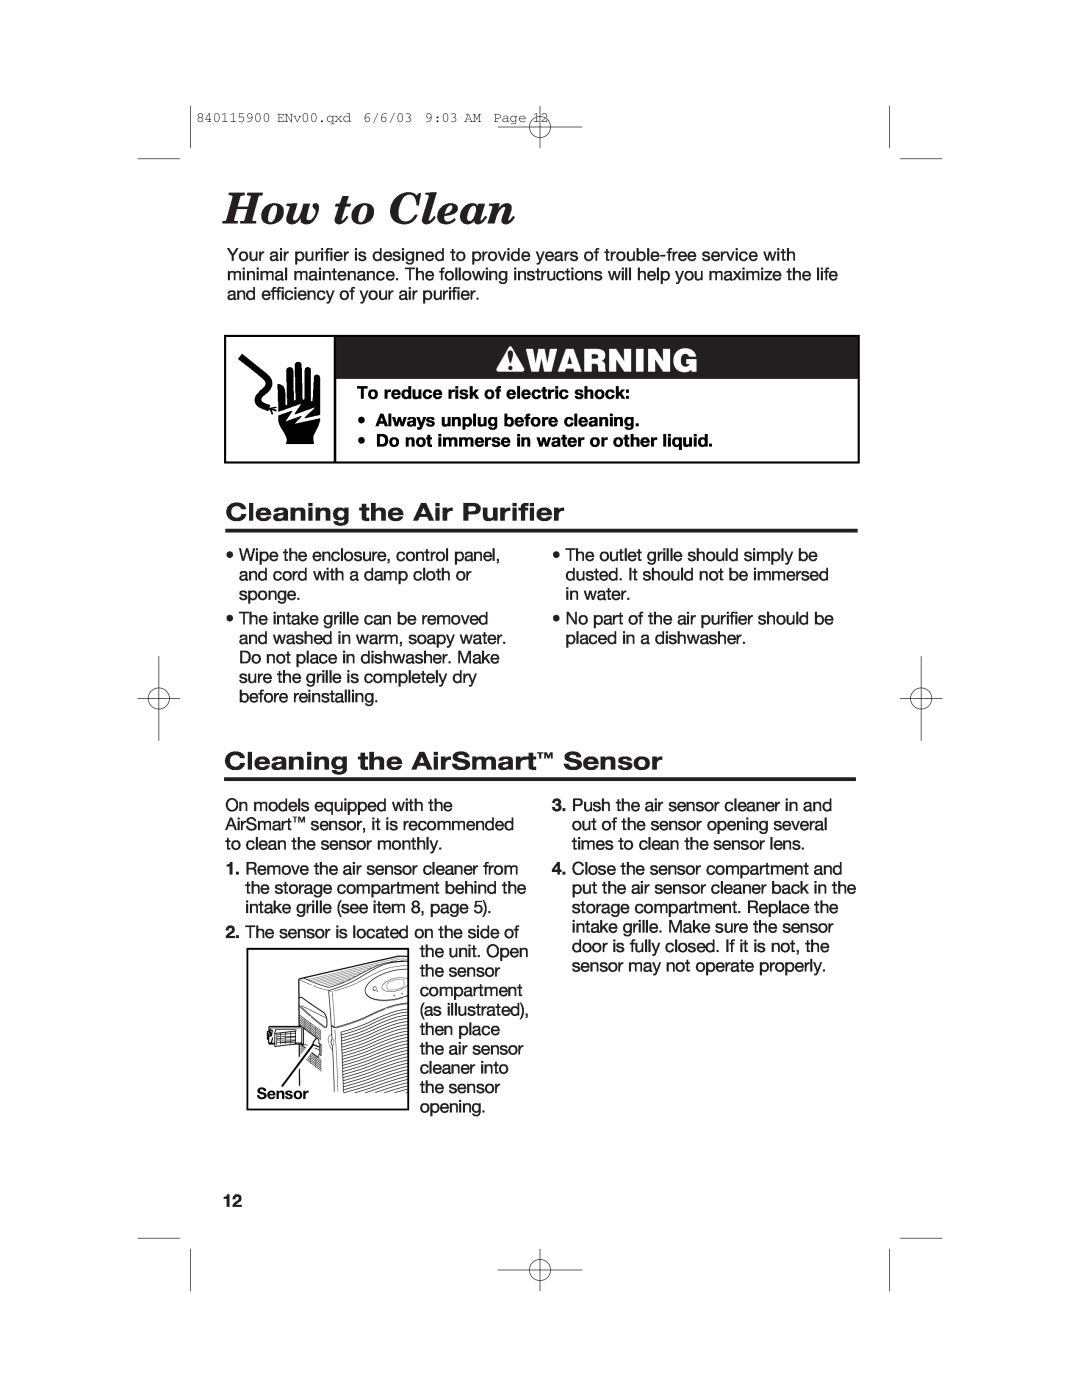 Hamilton Beach 840115900 manual How to Clean, Cleaning the Air Purifier, Cleaning the AirSmart Sensor, wWARNING 